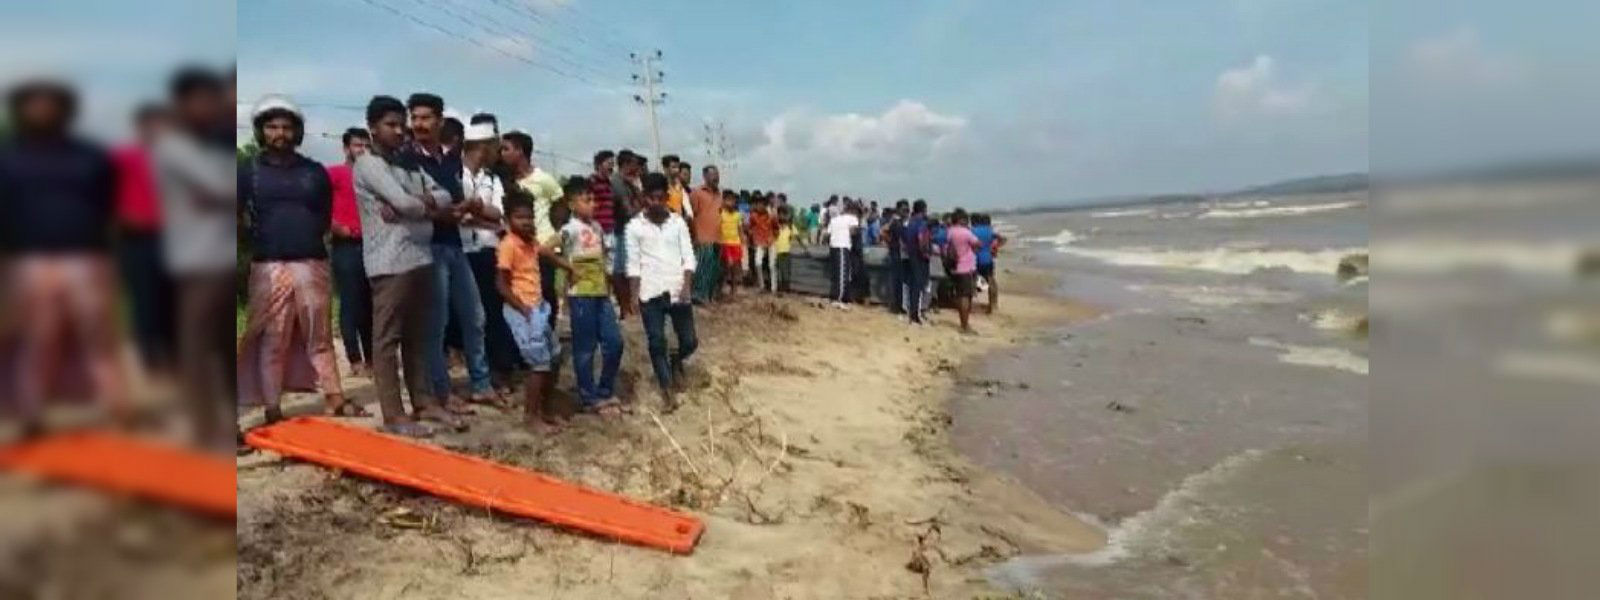 Boat with 5 capsizes in Kinniya: 2 dead, 1 missing